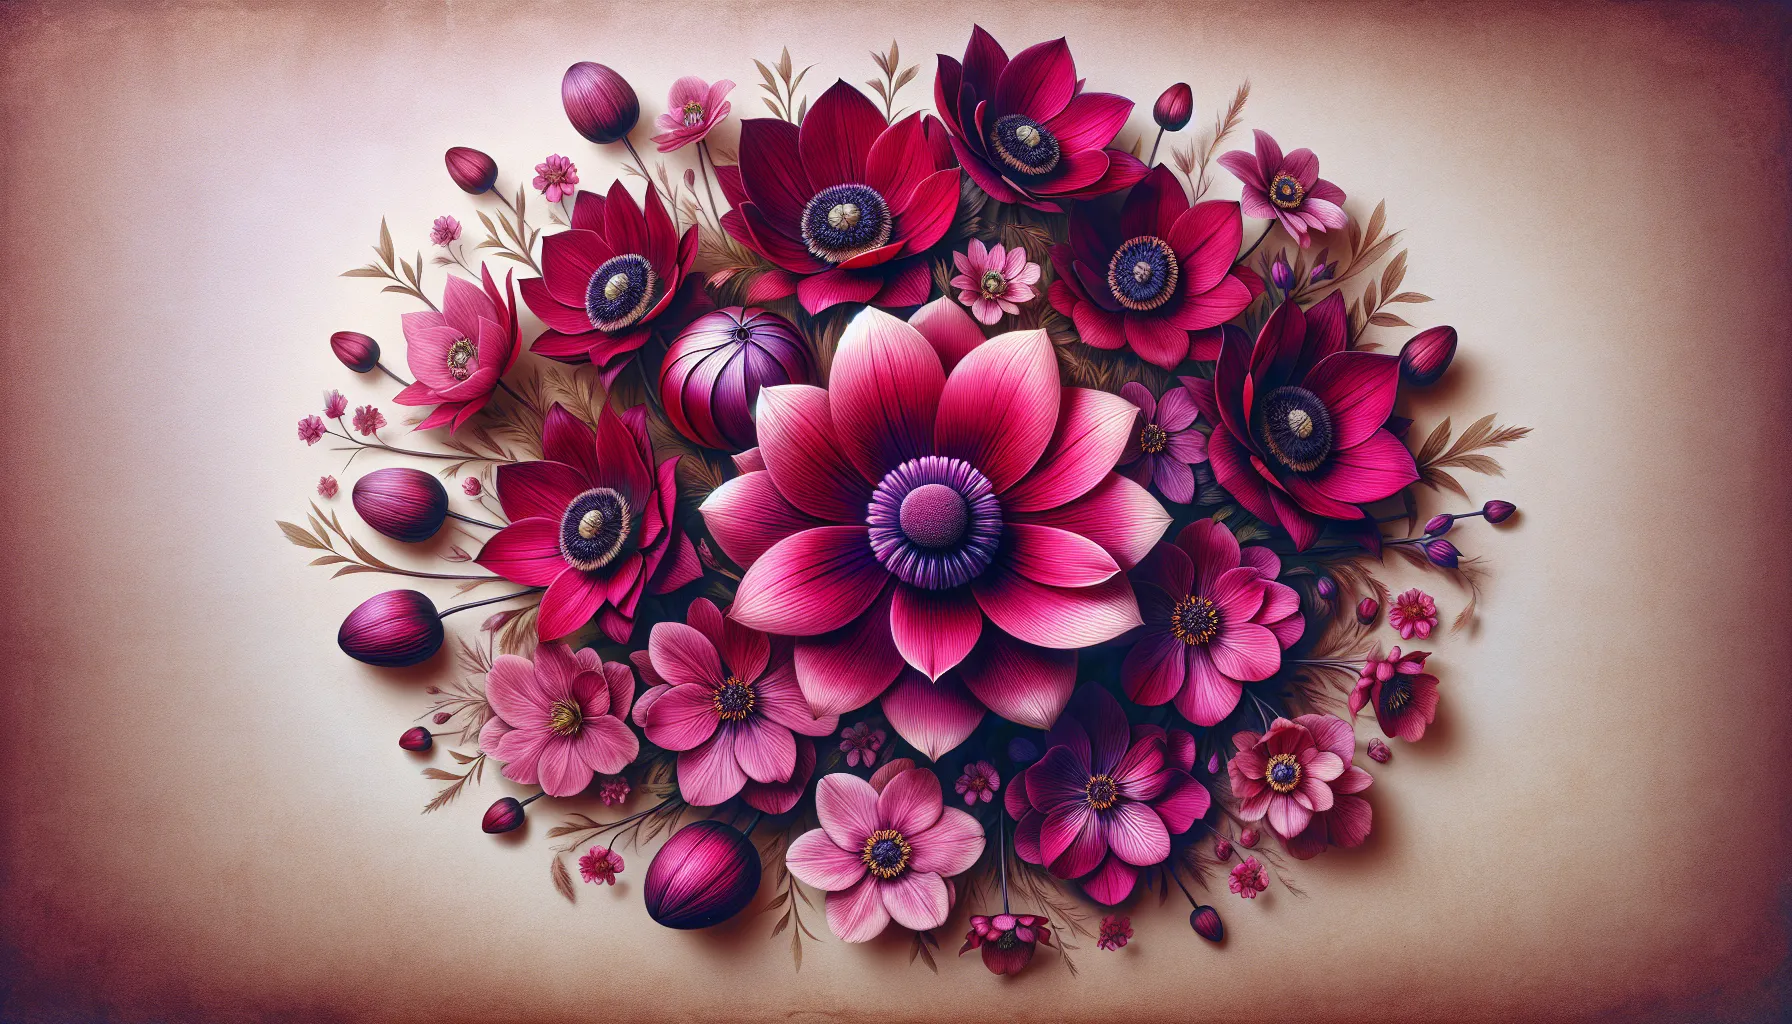 A vibrant arrangement of magenta flowers with various shades and patterns on a warm beige background.